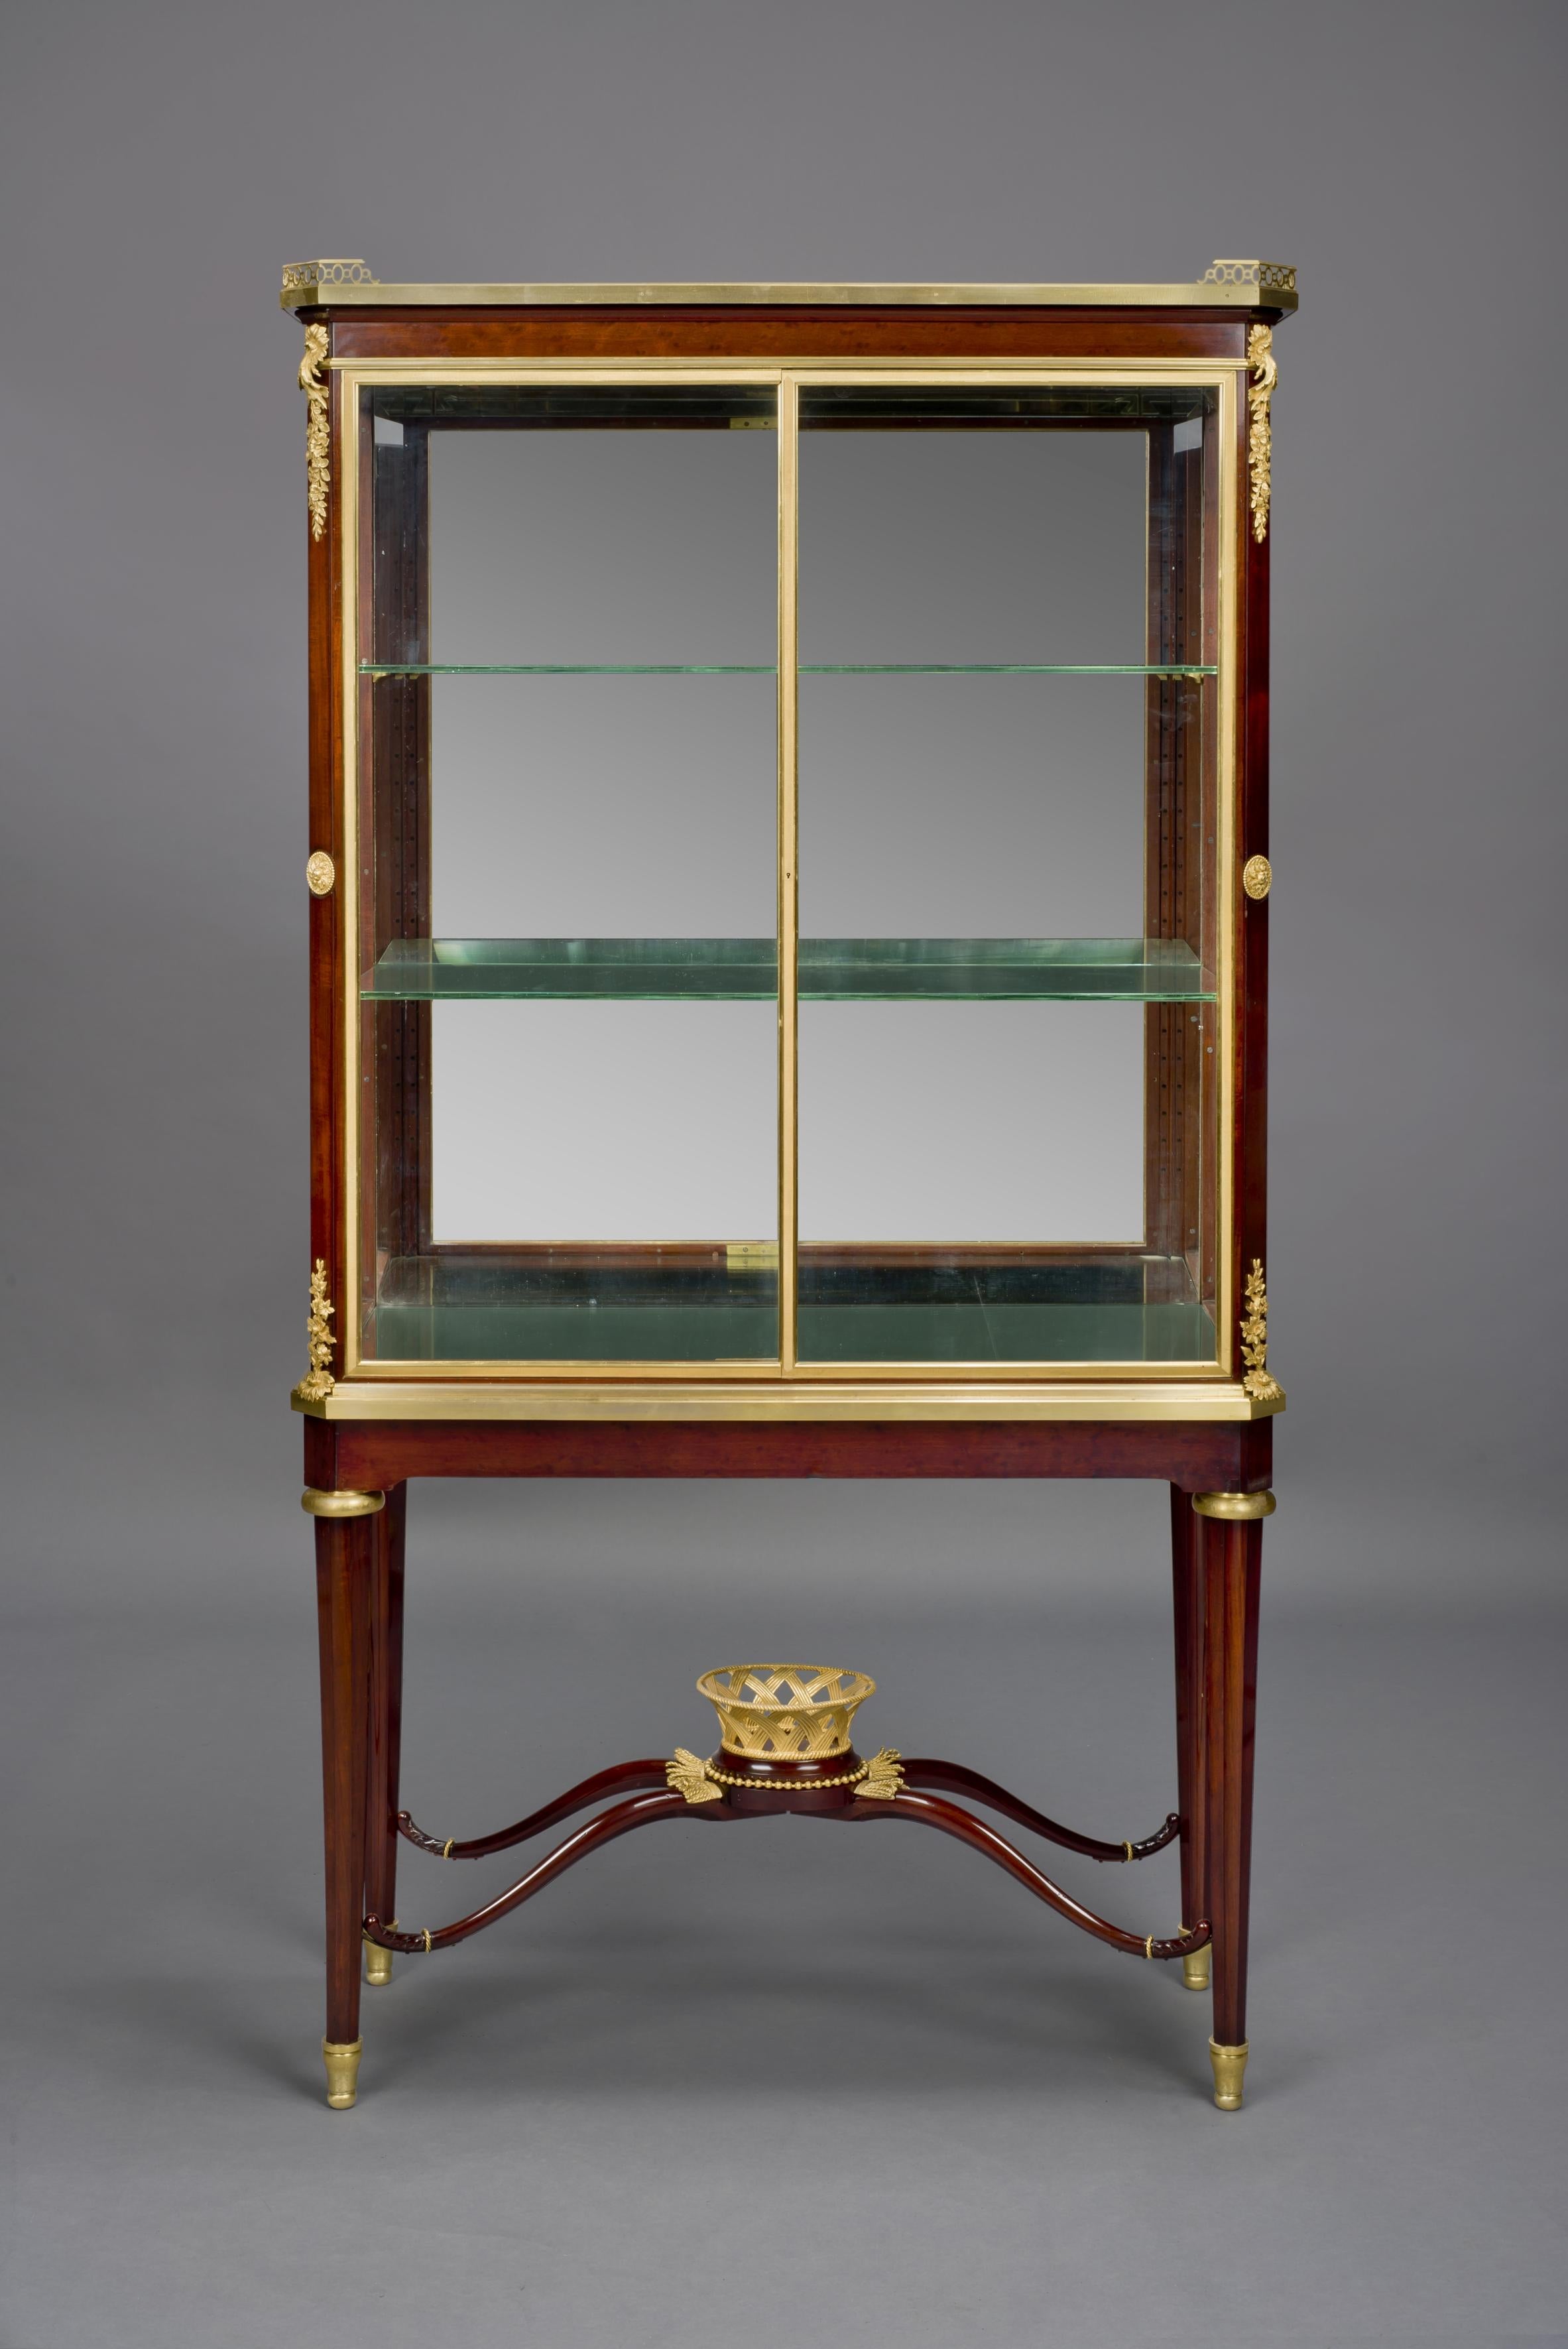 A fine Louis XVI style gilt bronze mounted mahogany vitrine, by Alfred Louis Beurdeley.

French, circa 1880.

Stamped to the carcass ‘A. Beurdeley à Paris’.

This fine mahogany vitrine has a gilt bronze galleried top above a glazed square